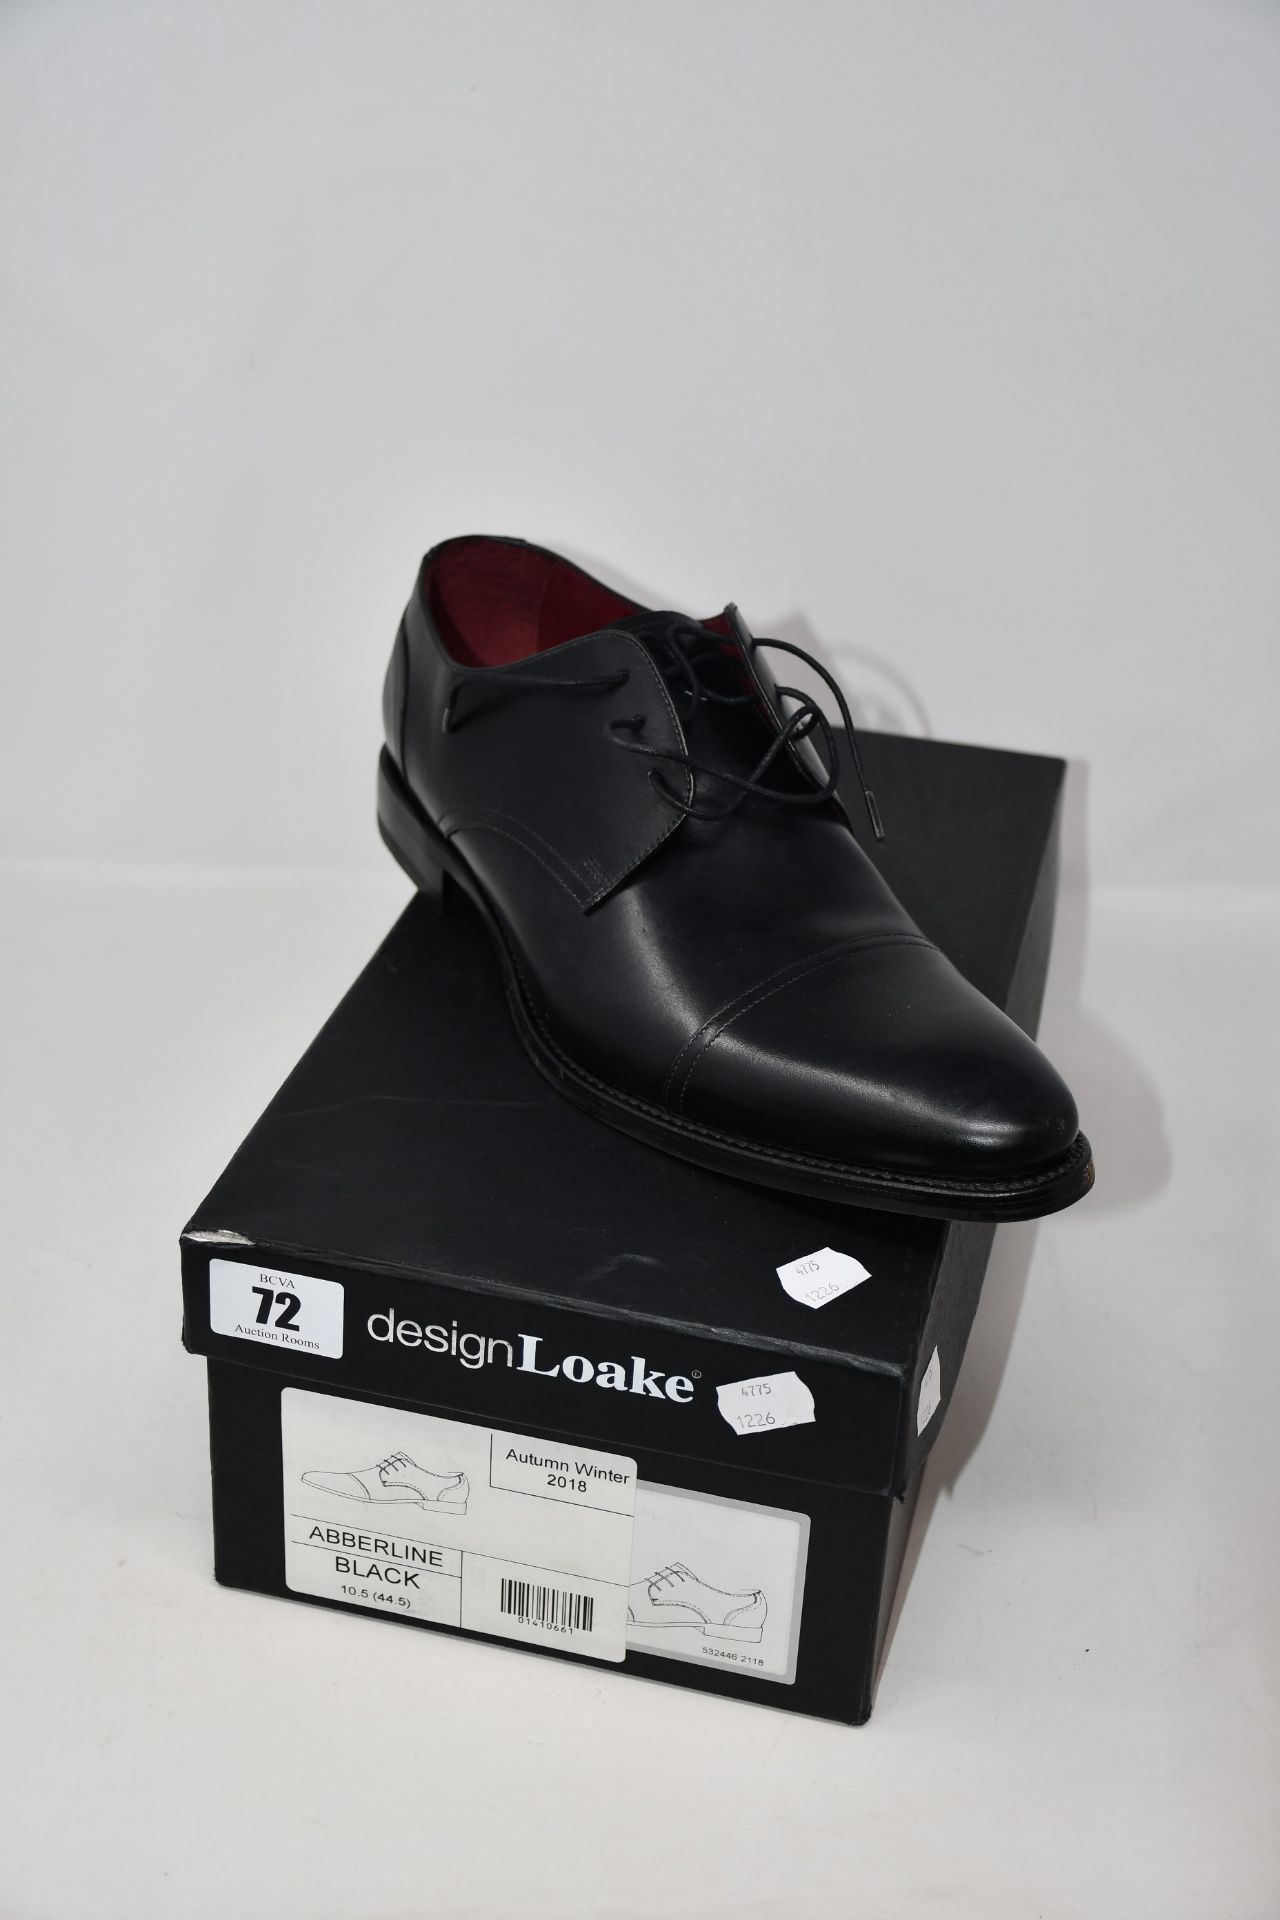 A pair of as new Loake Abberline shoes in black (UK 10.5 - RRP £175).